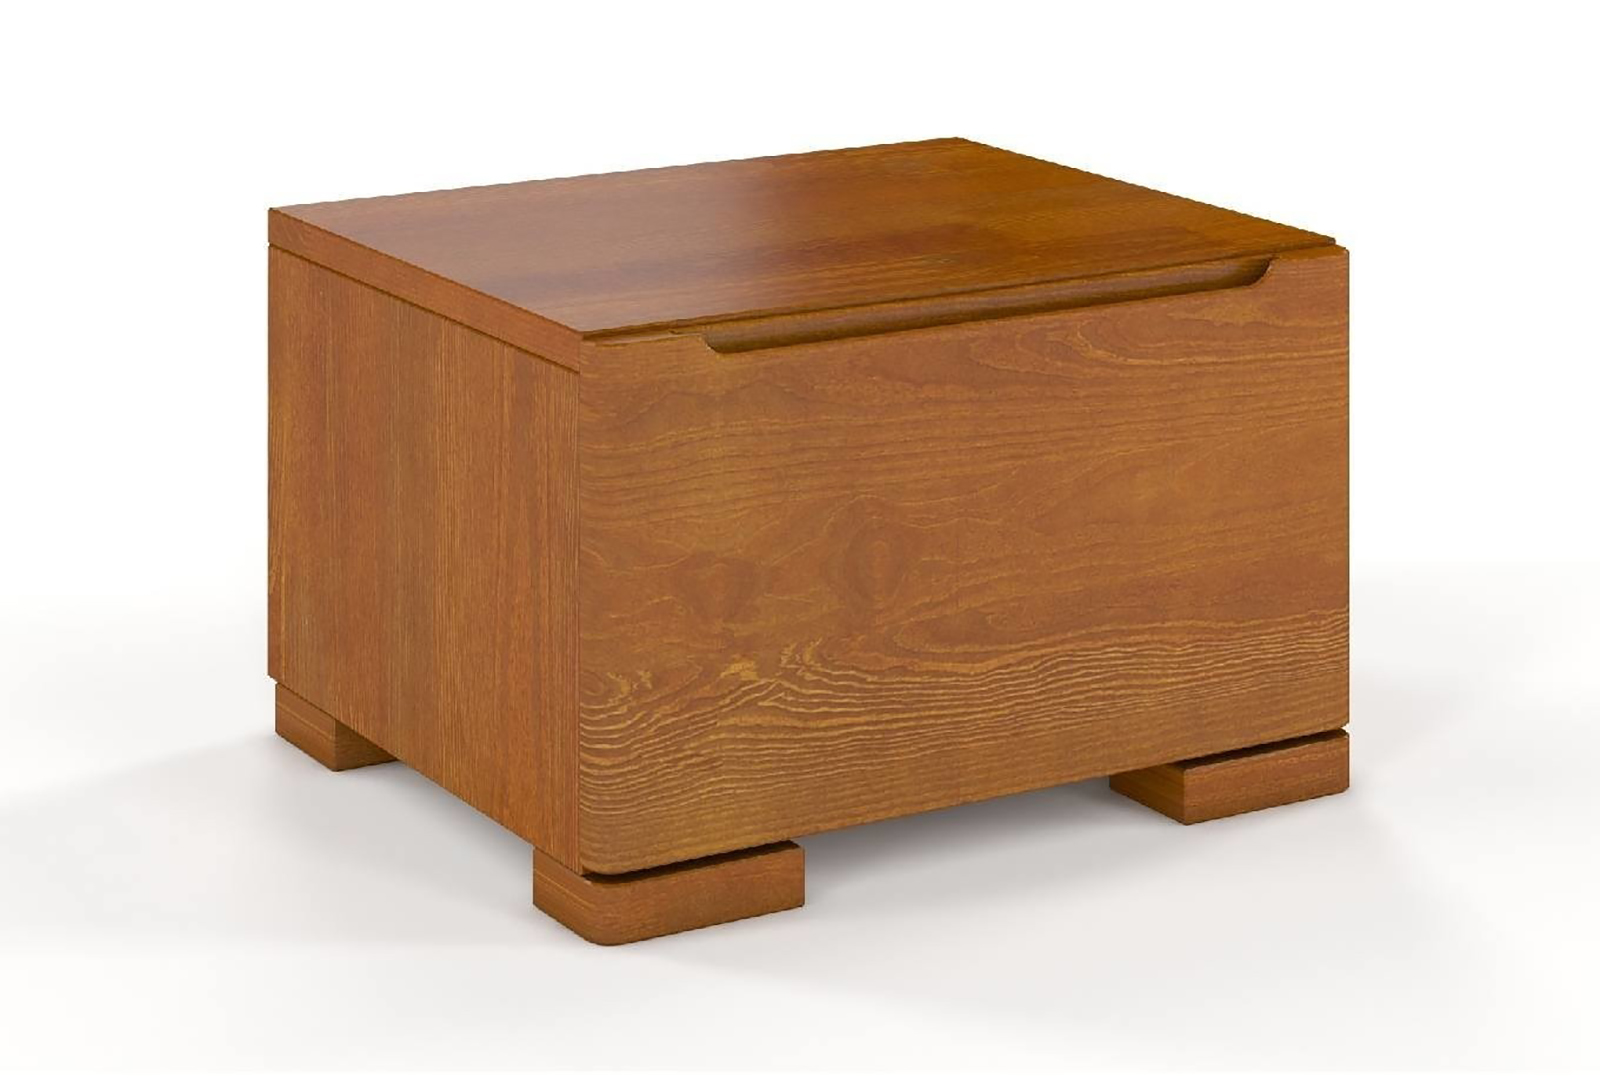 SKANDICA SPARTA LOW BEDSIDE TABLE MADE OF PINE WOOD 2